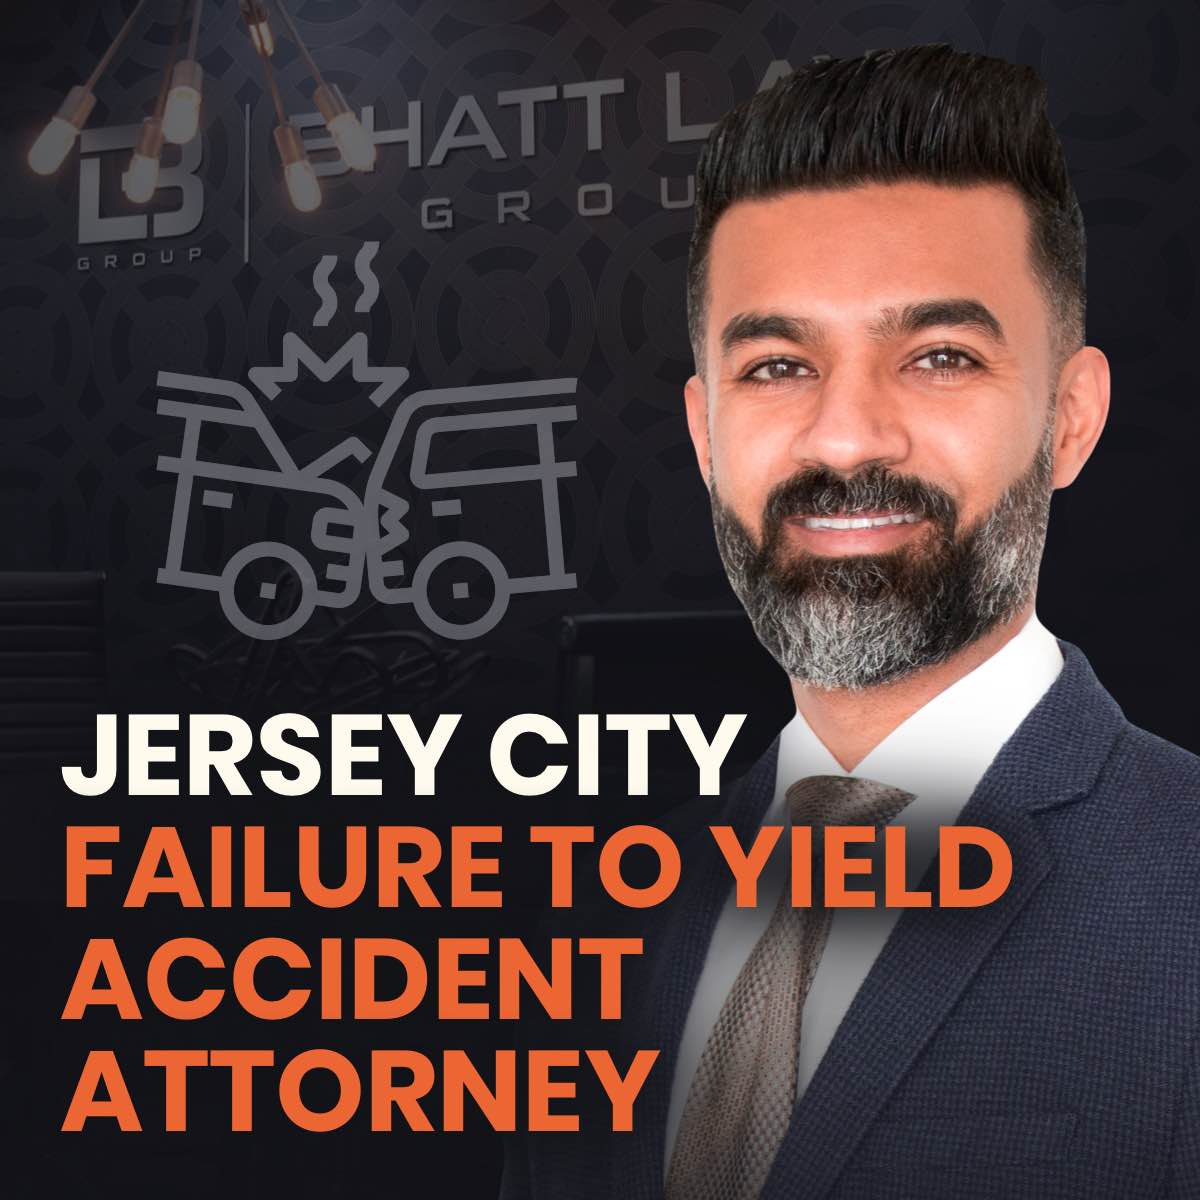 Jersey City Failure to Yield Accident Attorney